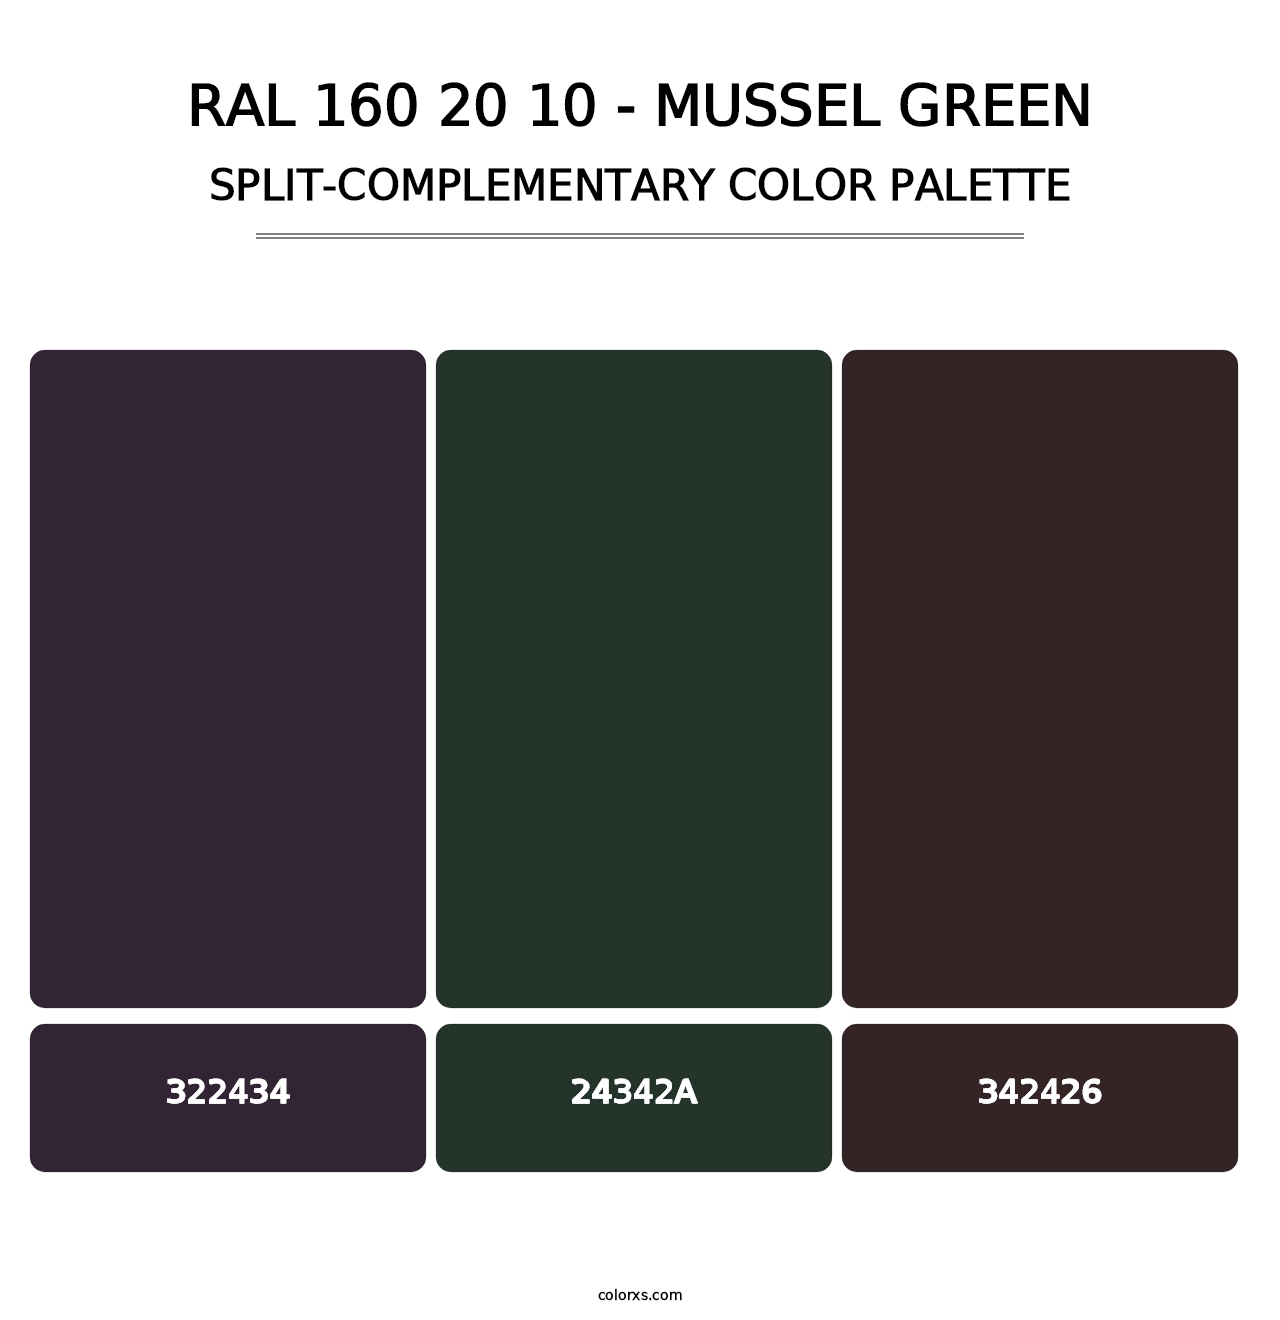 RAL 160 20 10 - Mussel Green - Split-Complementary Color Palette